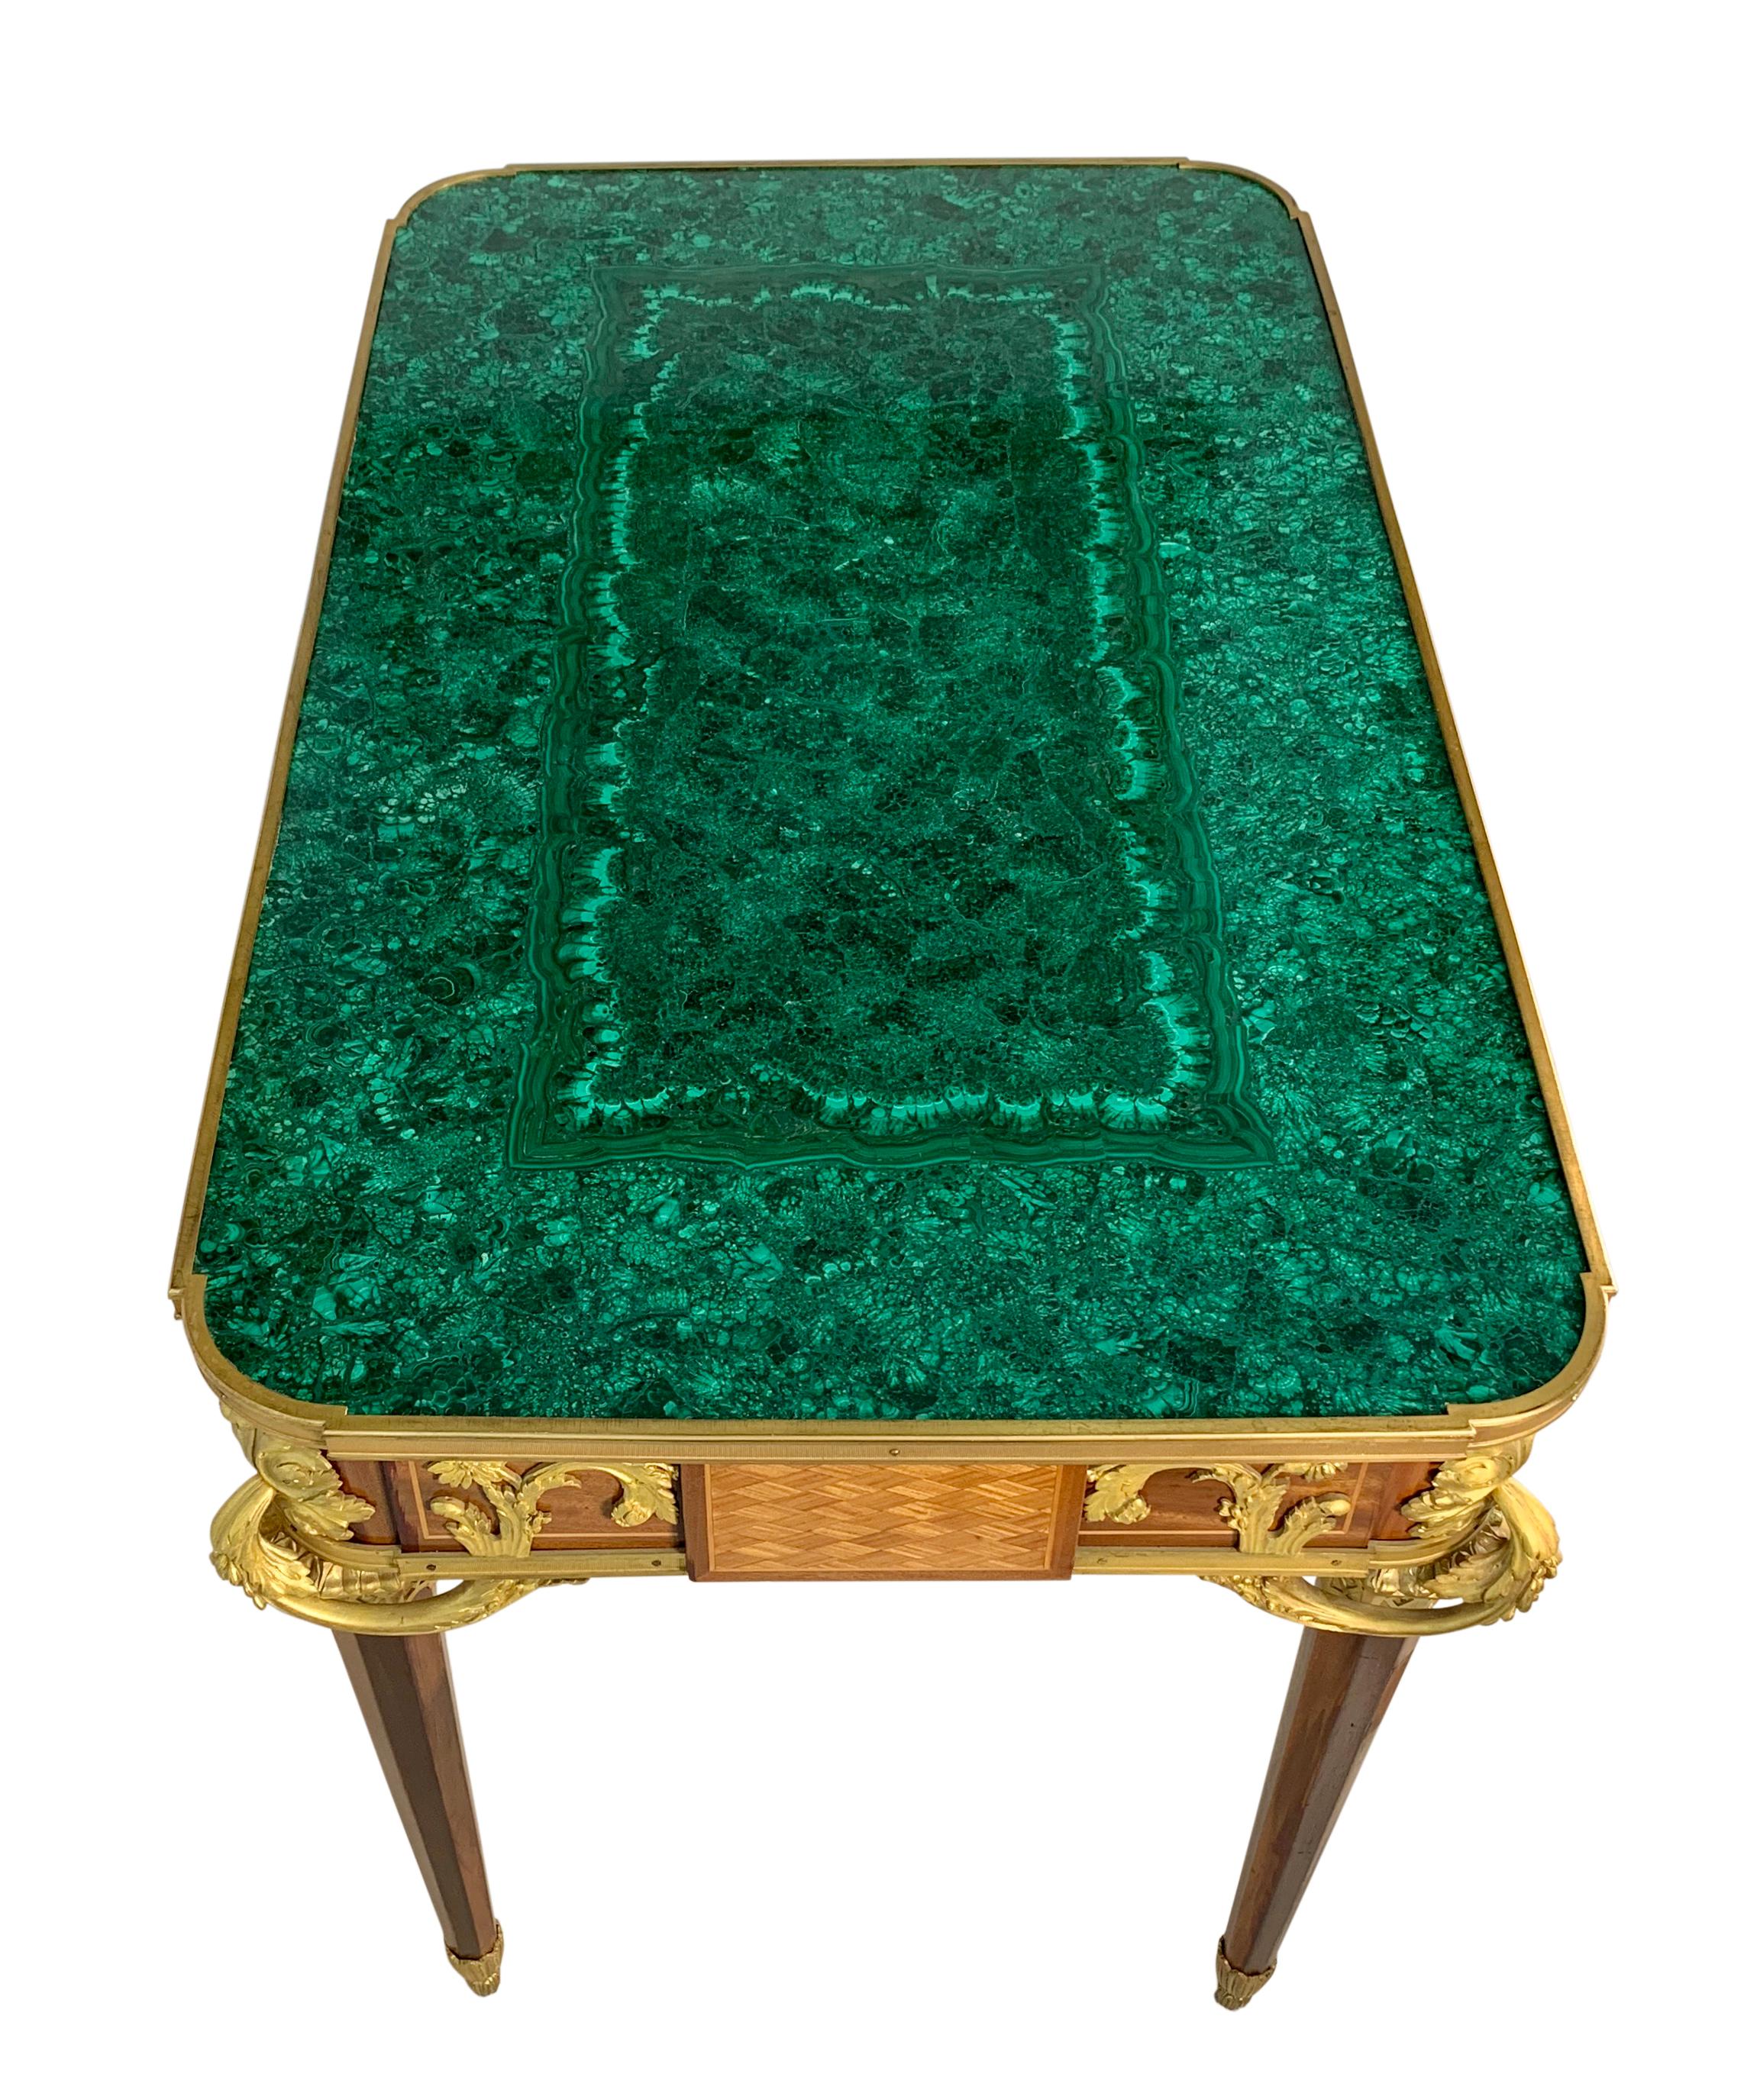 Antique French Ormolu Mounted Malachite Top Center Table / desk For Sale 2